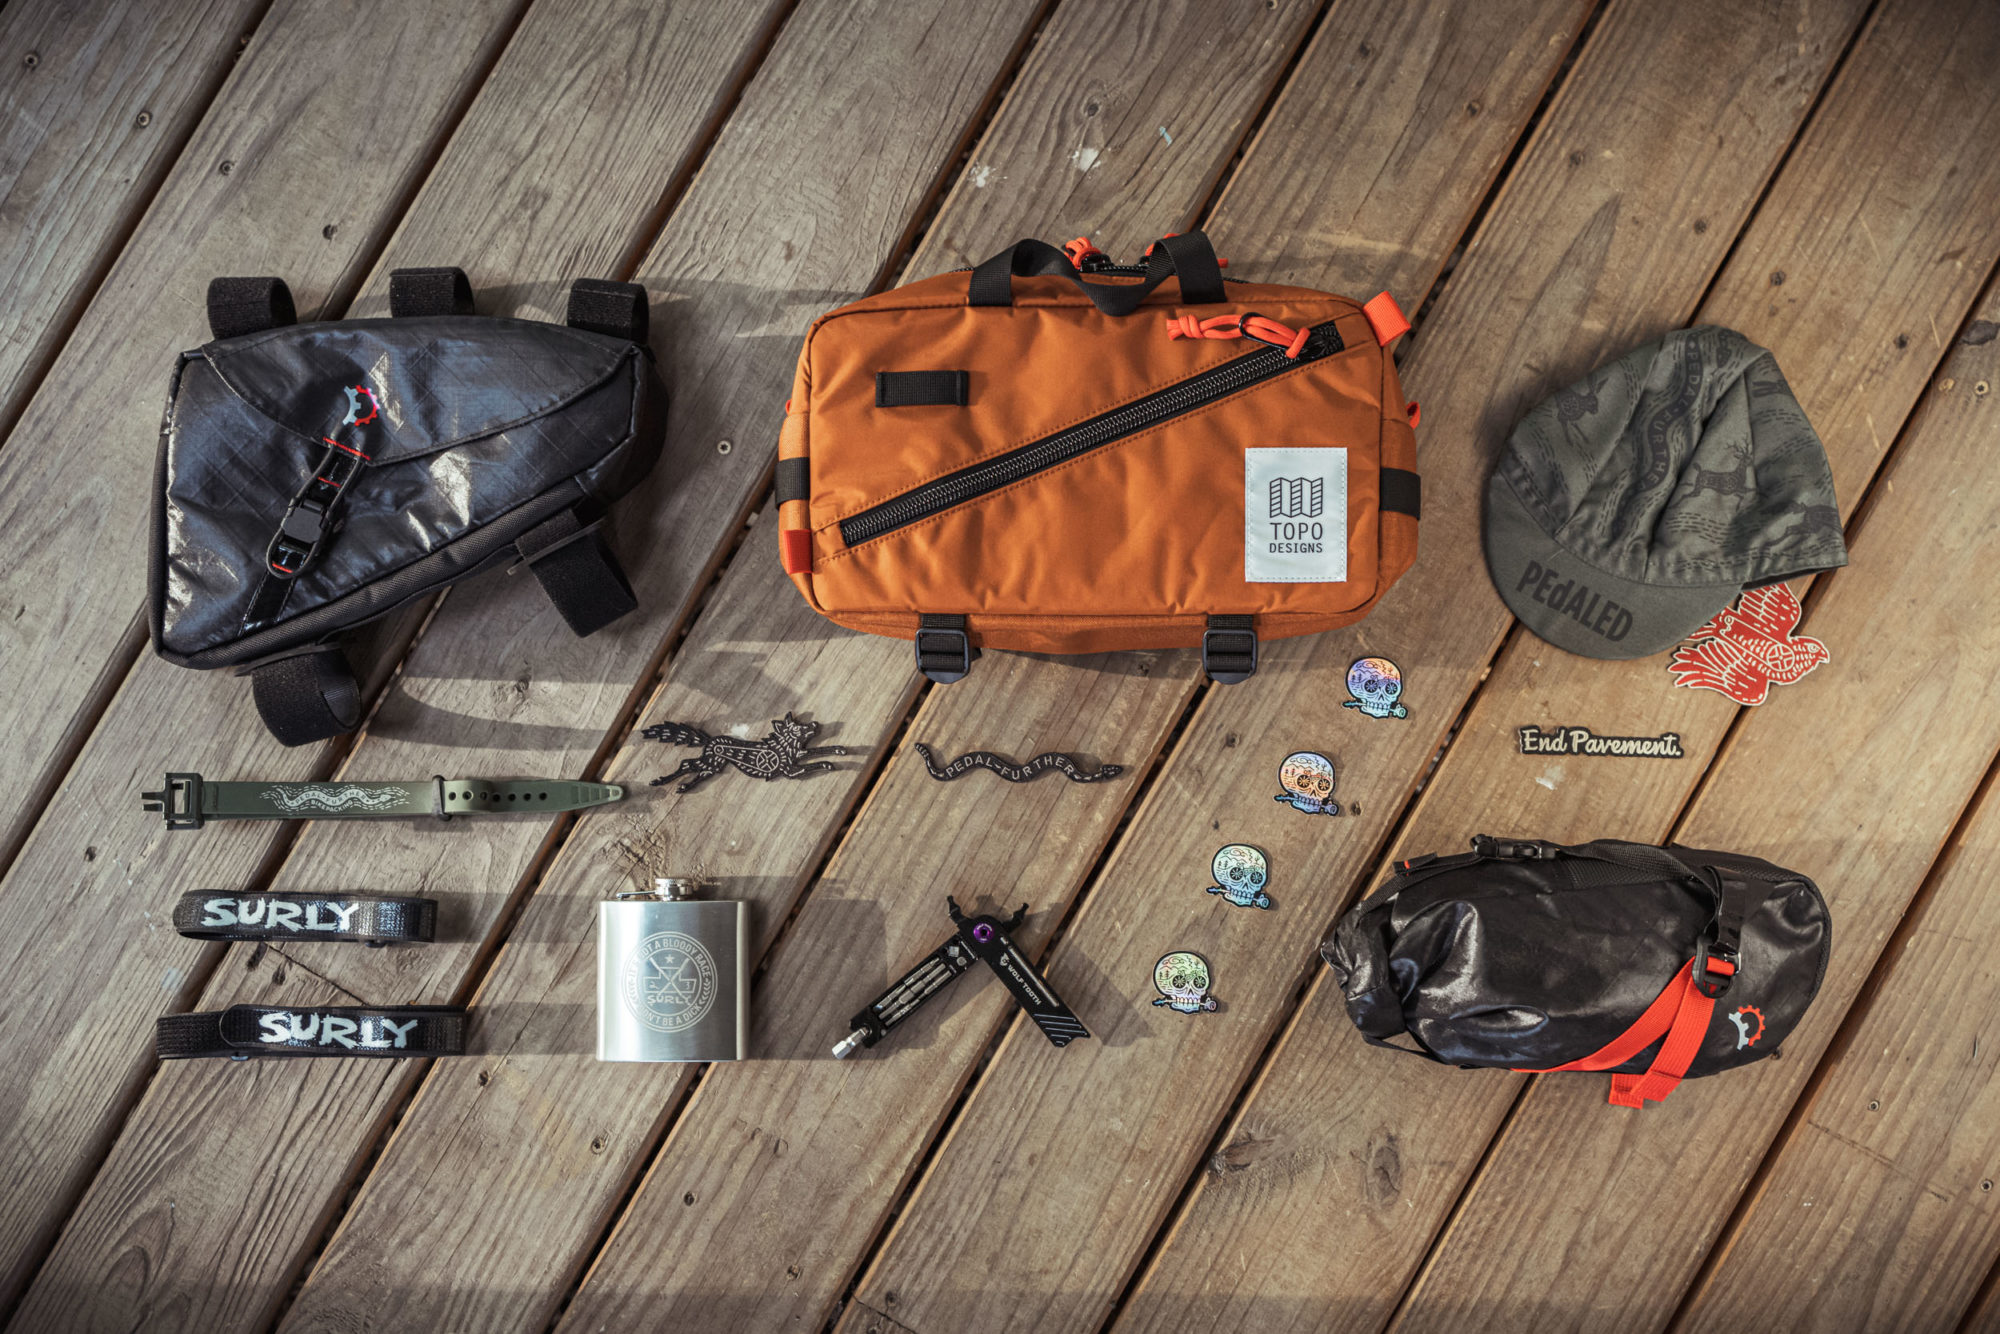 Fill in The Map bikepacking routes prizes